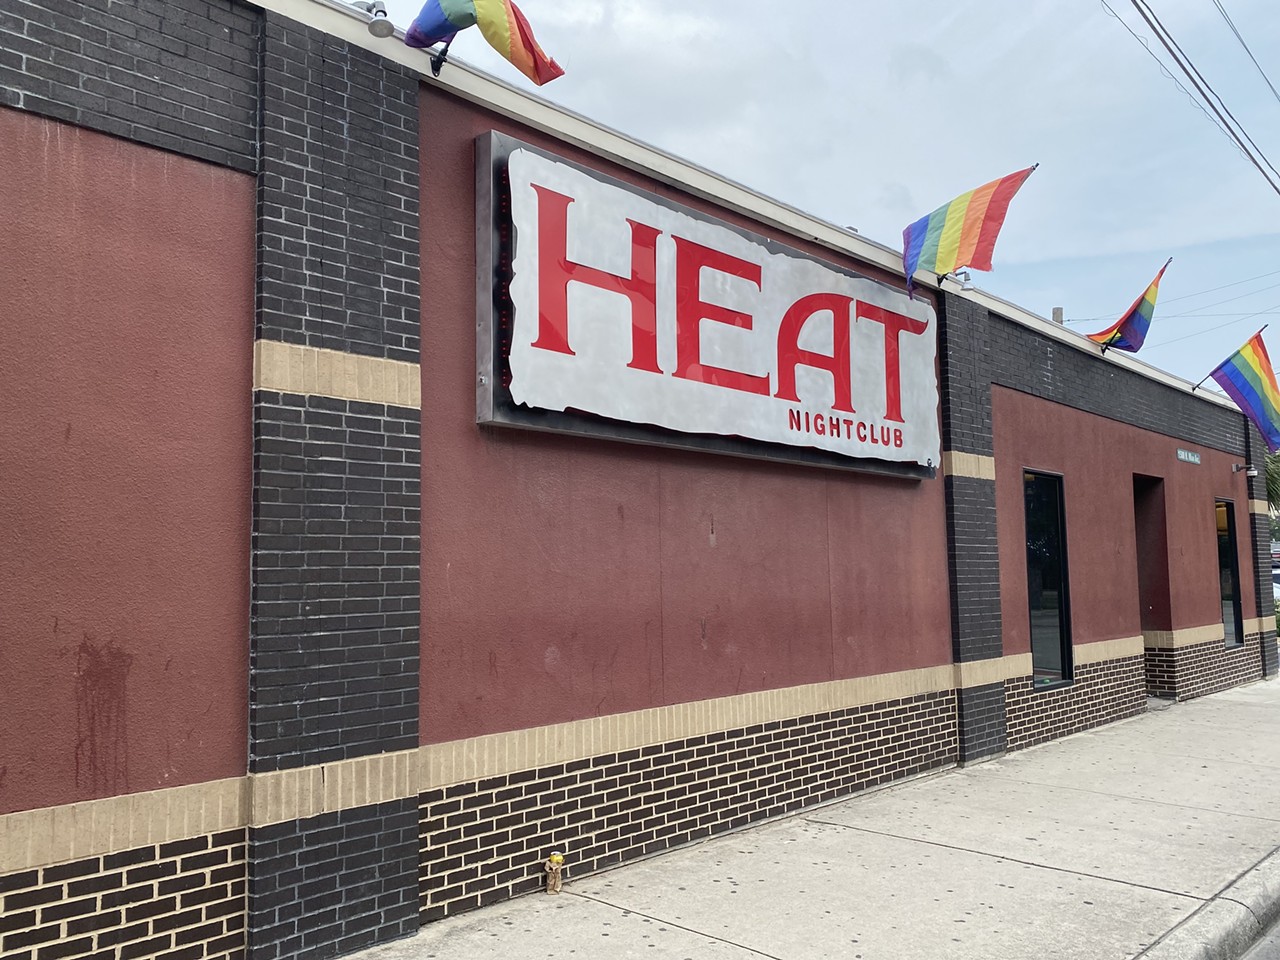 Heat Nightclub
1500 N. Main Ave., (210) 227-2600, heatsa.com
If you need to turn up the heat, look no further than Heat Nightclub on the Main Strip. The dance floor is often packed, music pumping and drinks flowing, and the LGBTQ+ space welcomes people from all walks of life. The club also features more quiet and intimate spaces such as the back patio and “Chill Bar.”